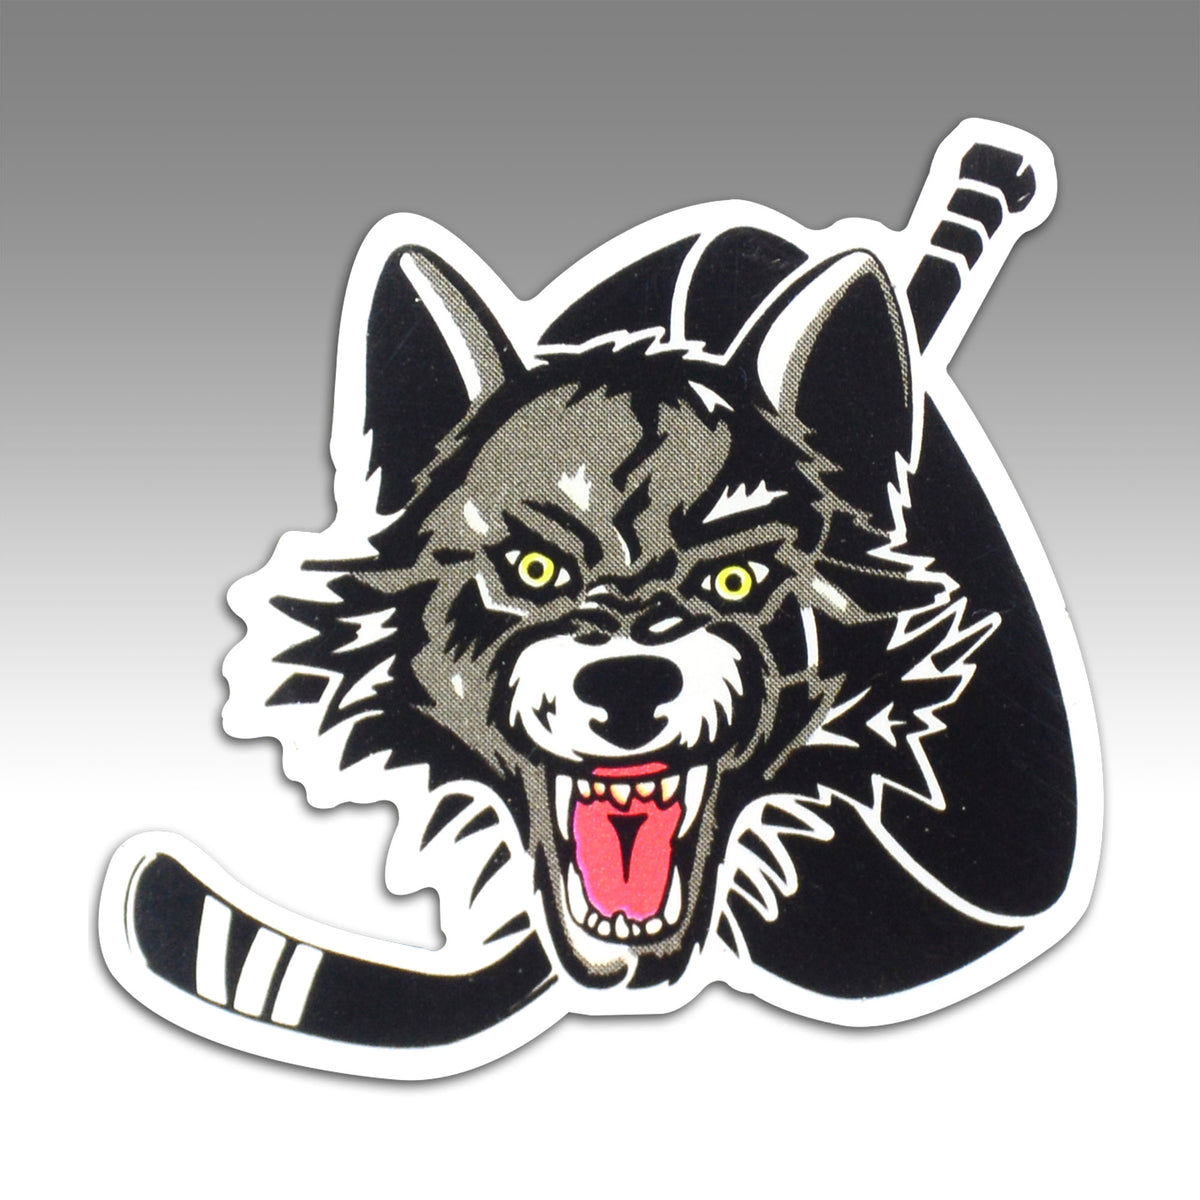 Chicago Wolves (@chicagowolves) • Instagram photos and videos